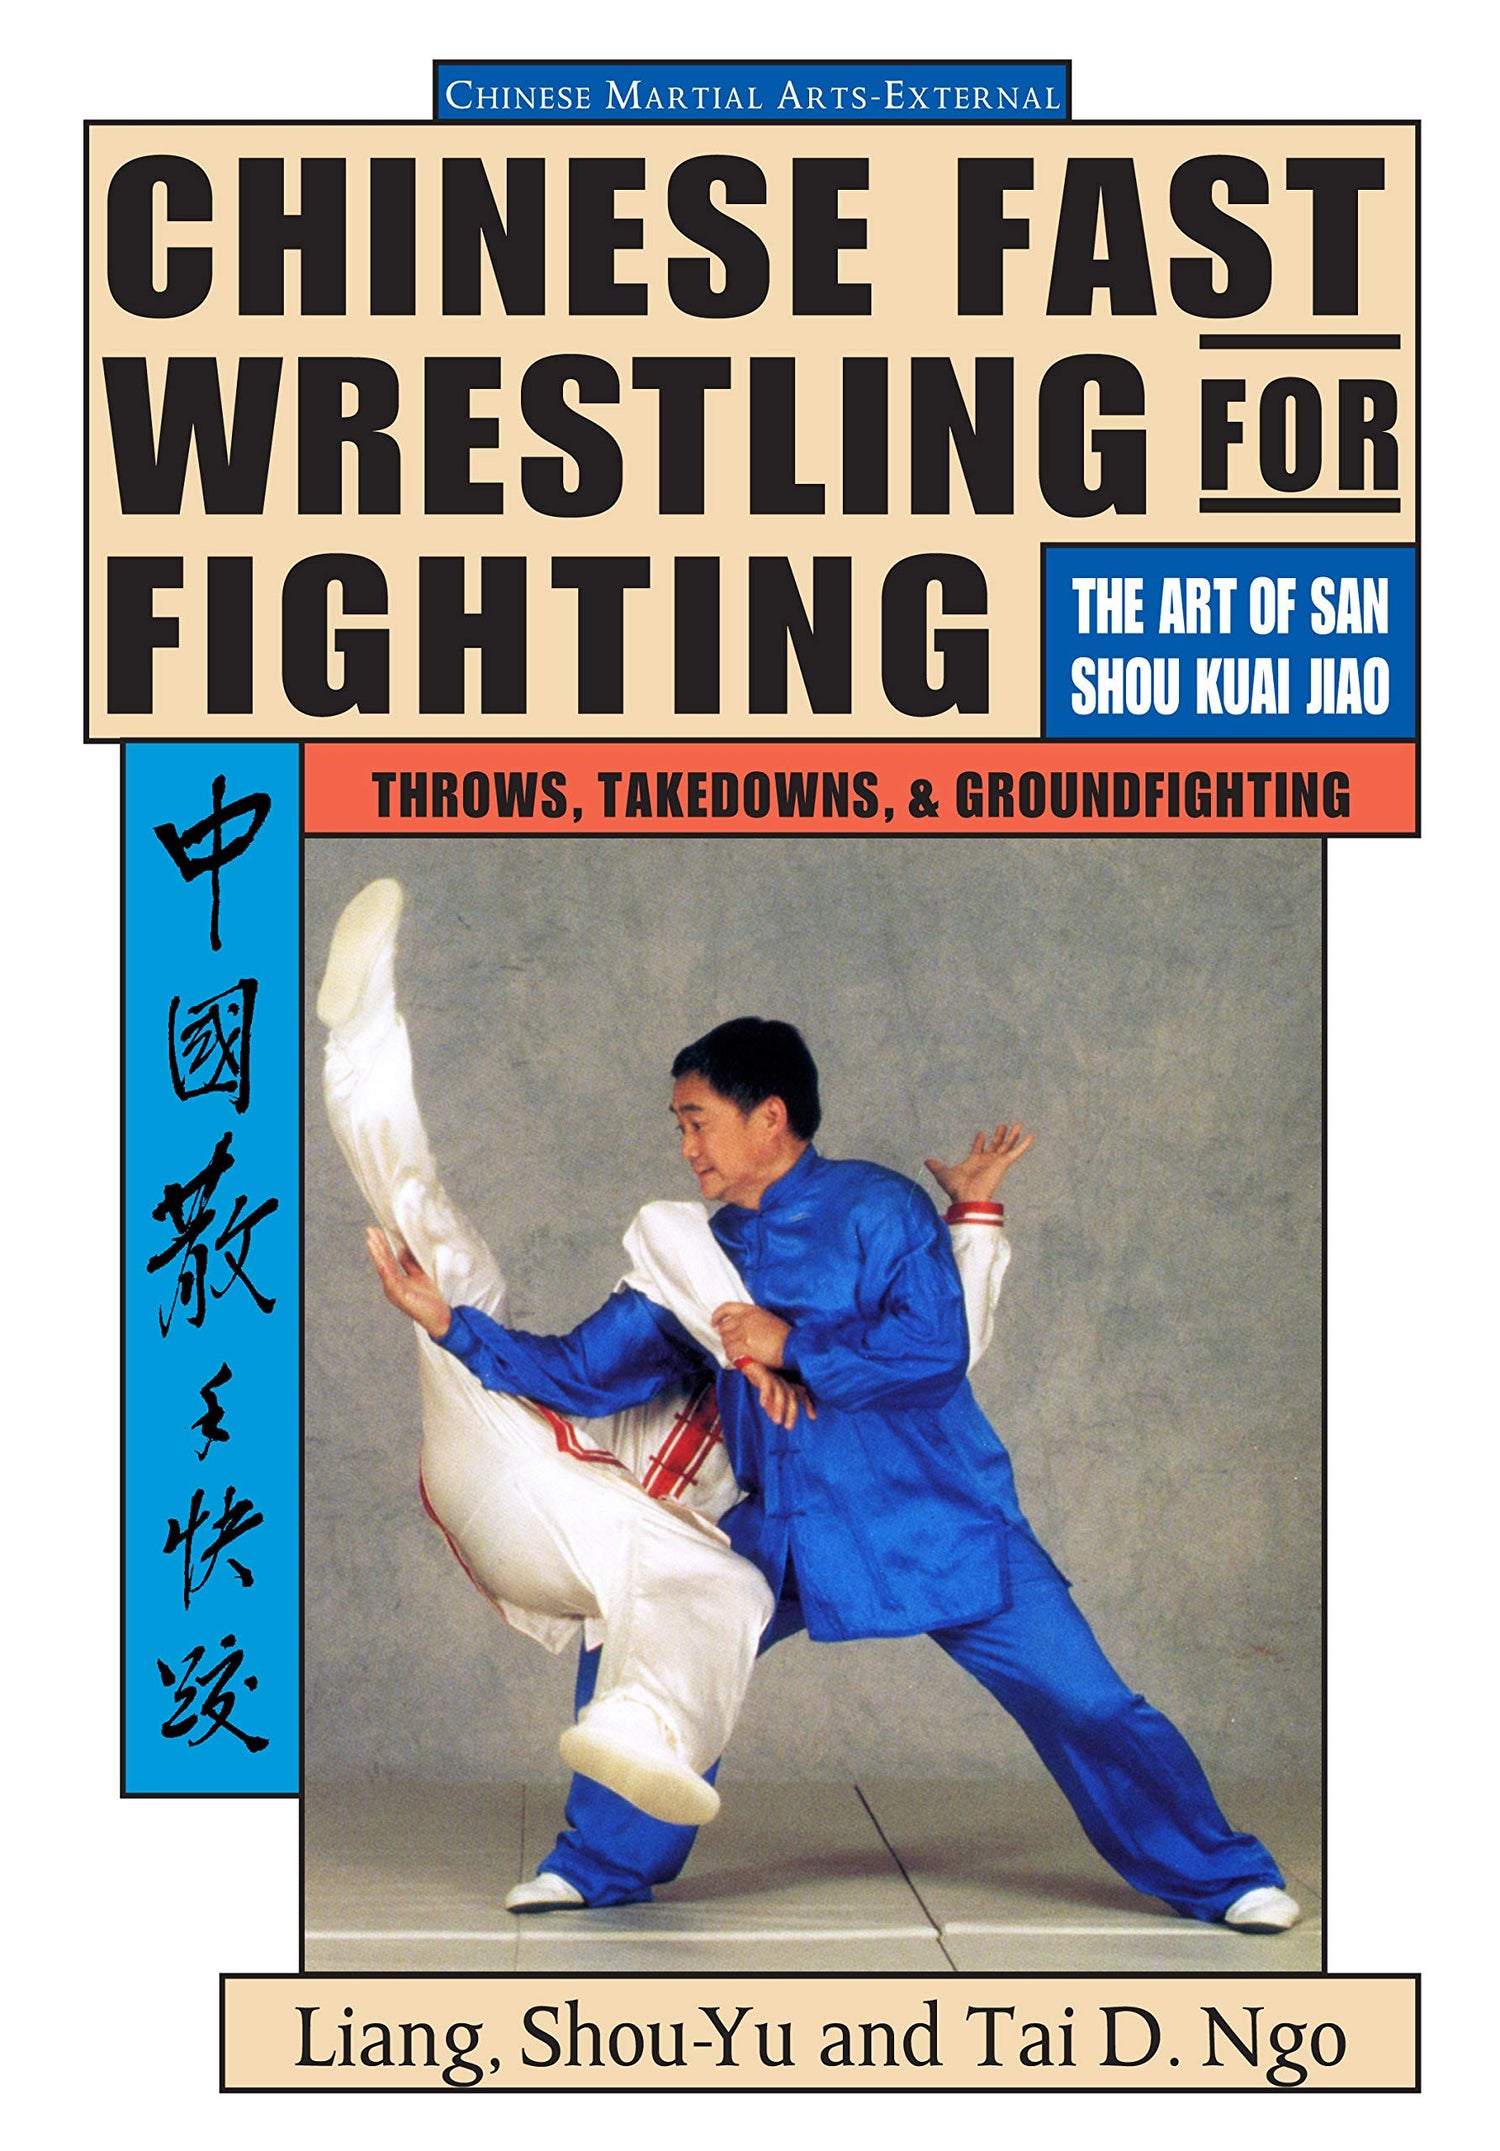 Chinese Fast Wrestling for Fighting: The Art of San Shou Kuai Jiao Throws, Takedowns, & Ground-Fighting Book by Shou-Yu Liang - Budovideos Inc